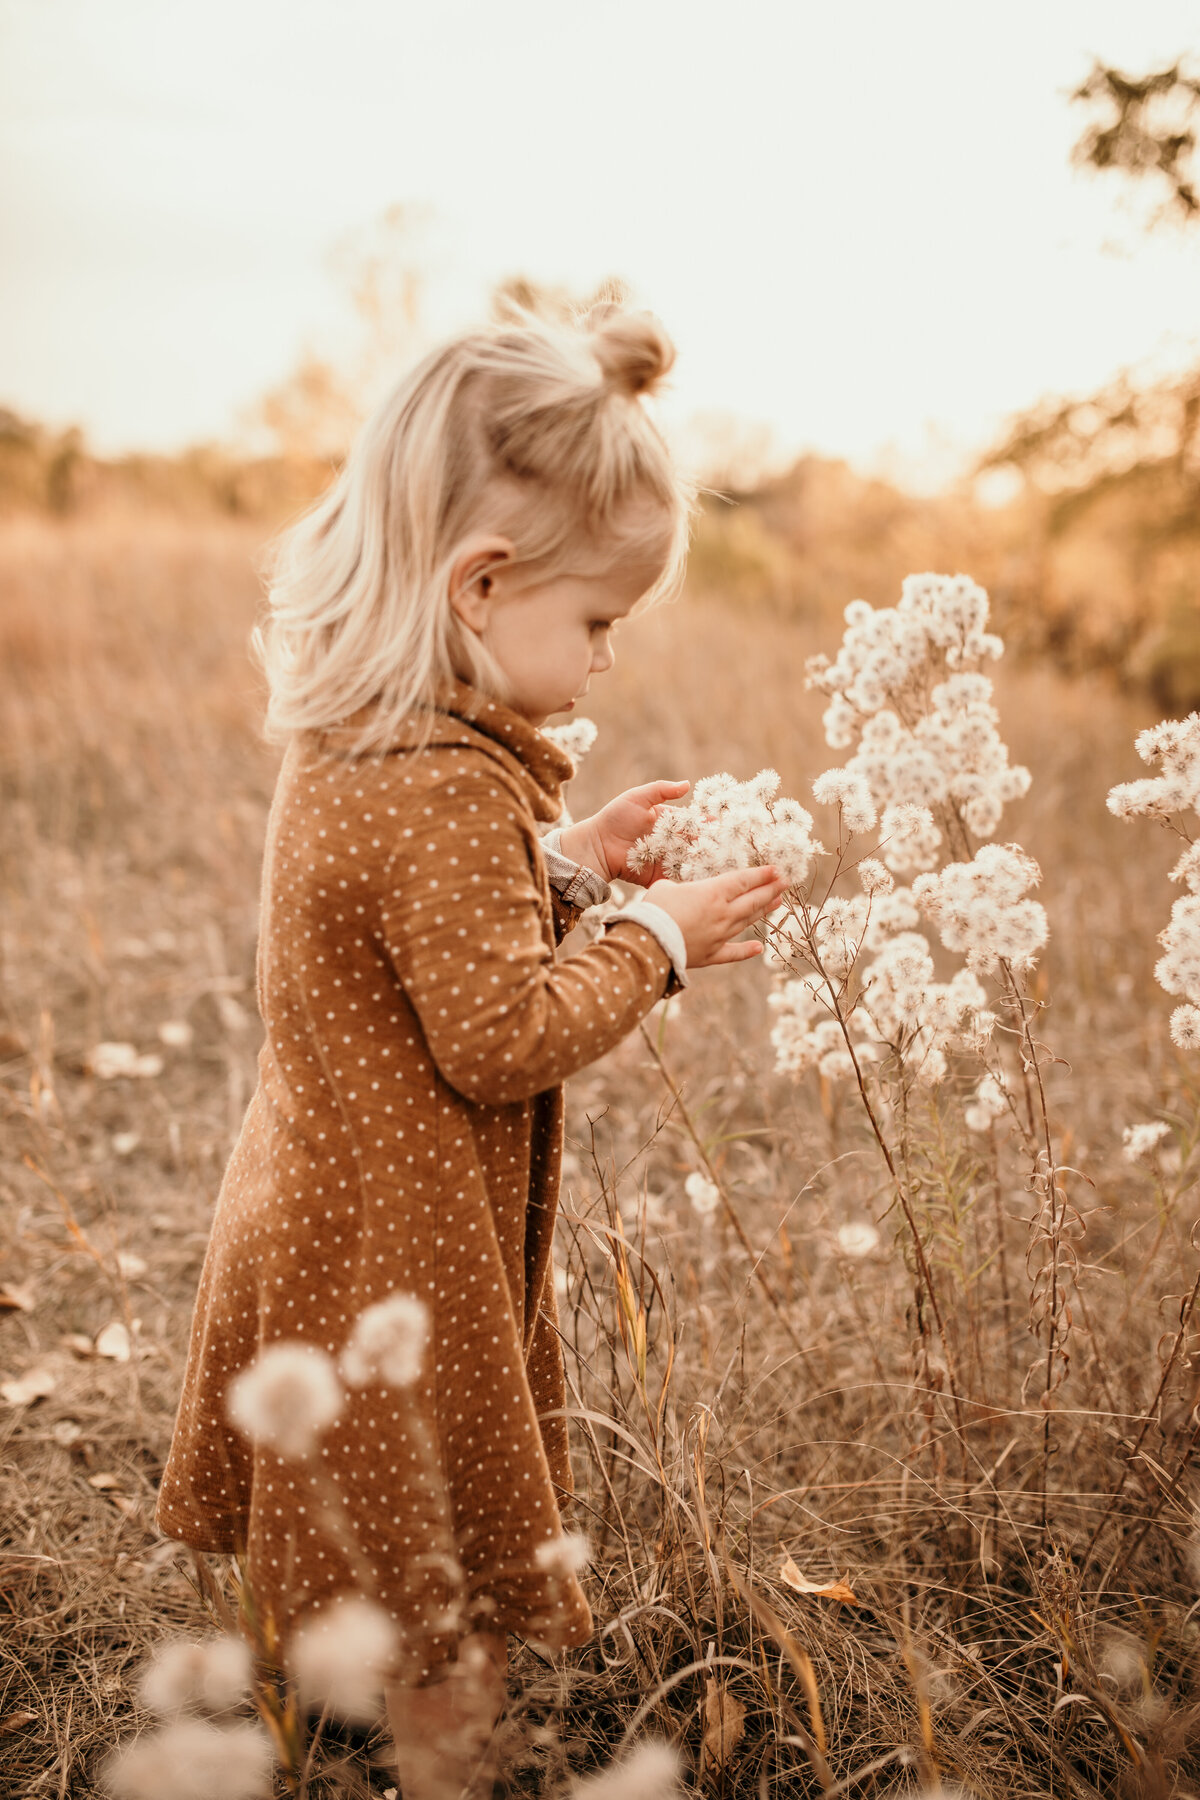 Little girl playing in flowers.